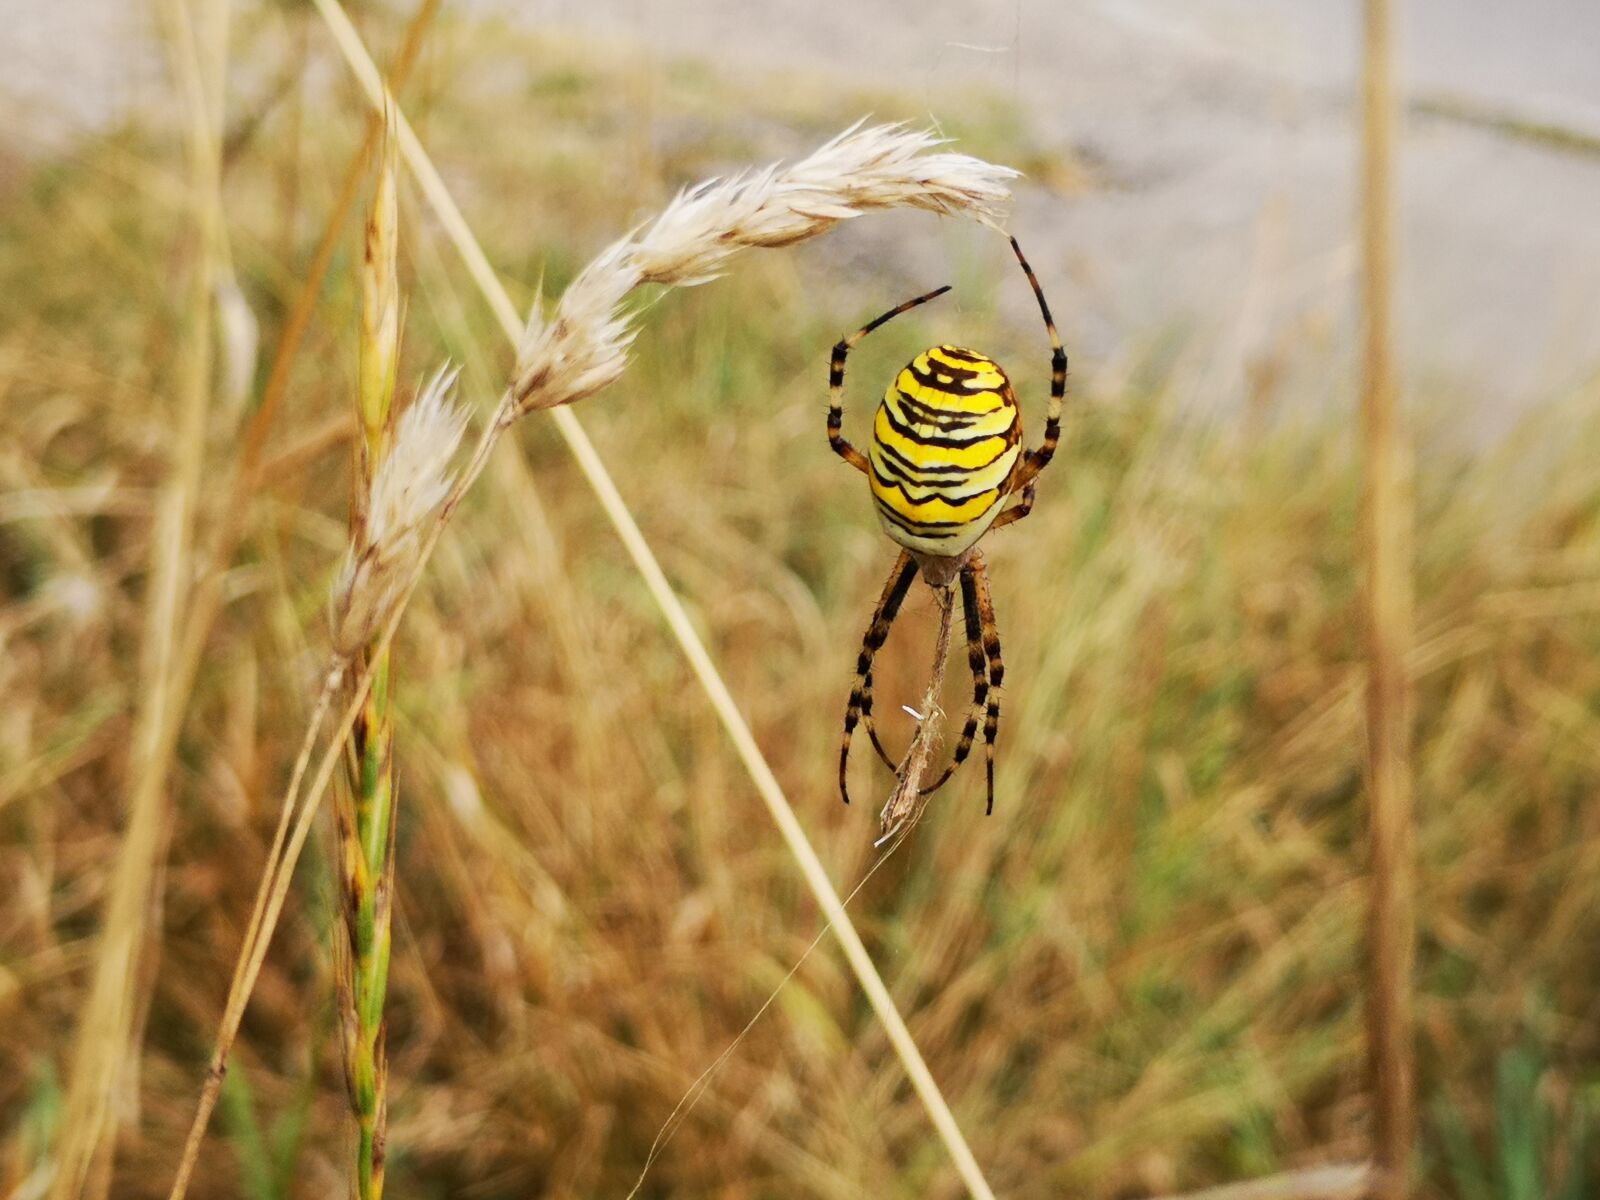 HUAWEI P20 sample photo. Spider, wasp spider, web photography